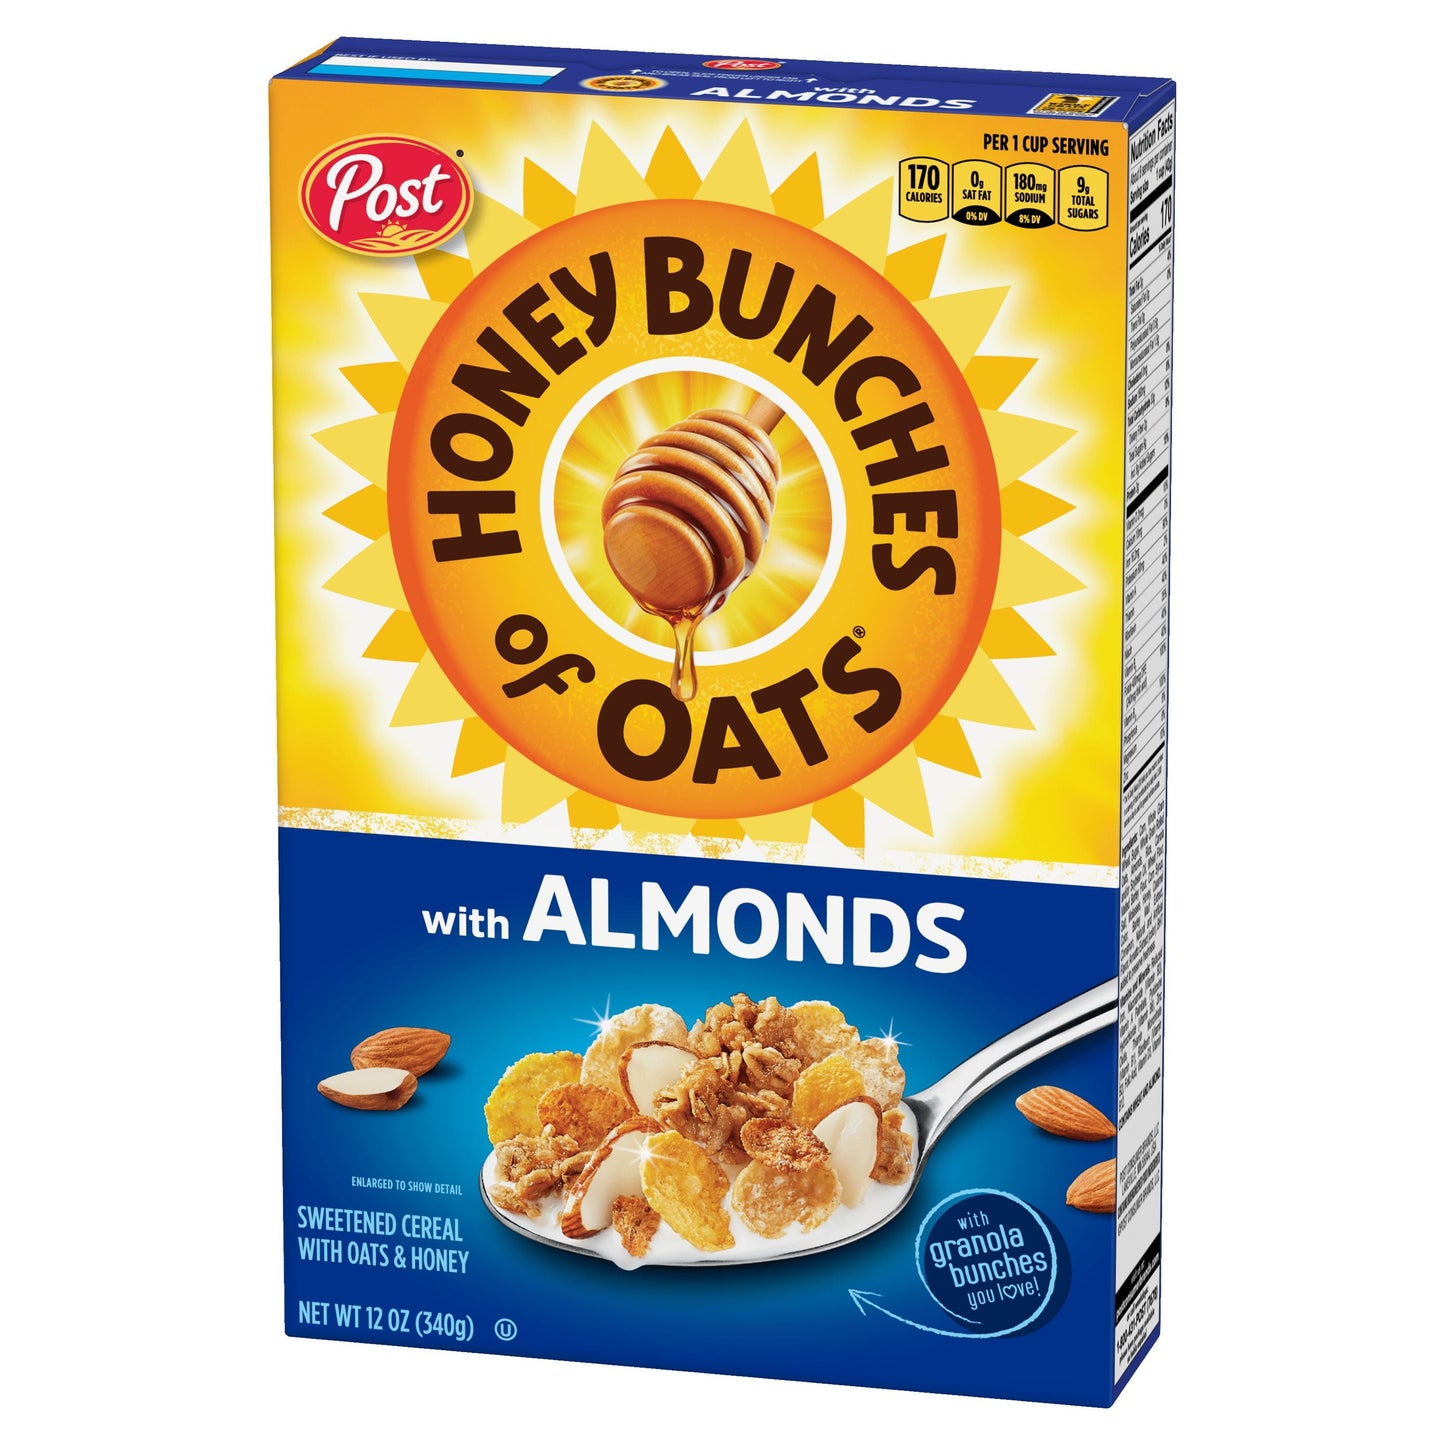 Post Honey Bunches of Oats with Almonds Breakfast Cereal, 12 OZ Box